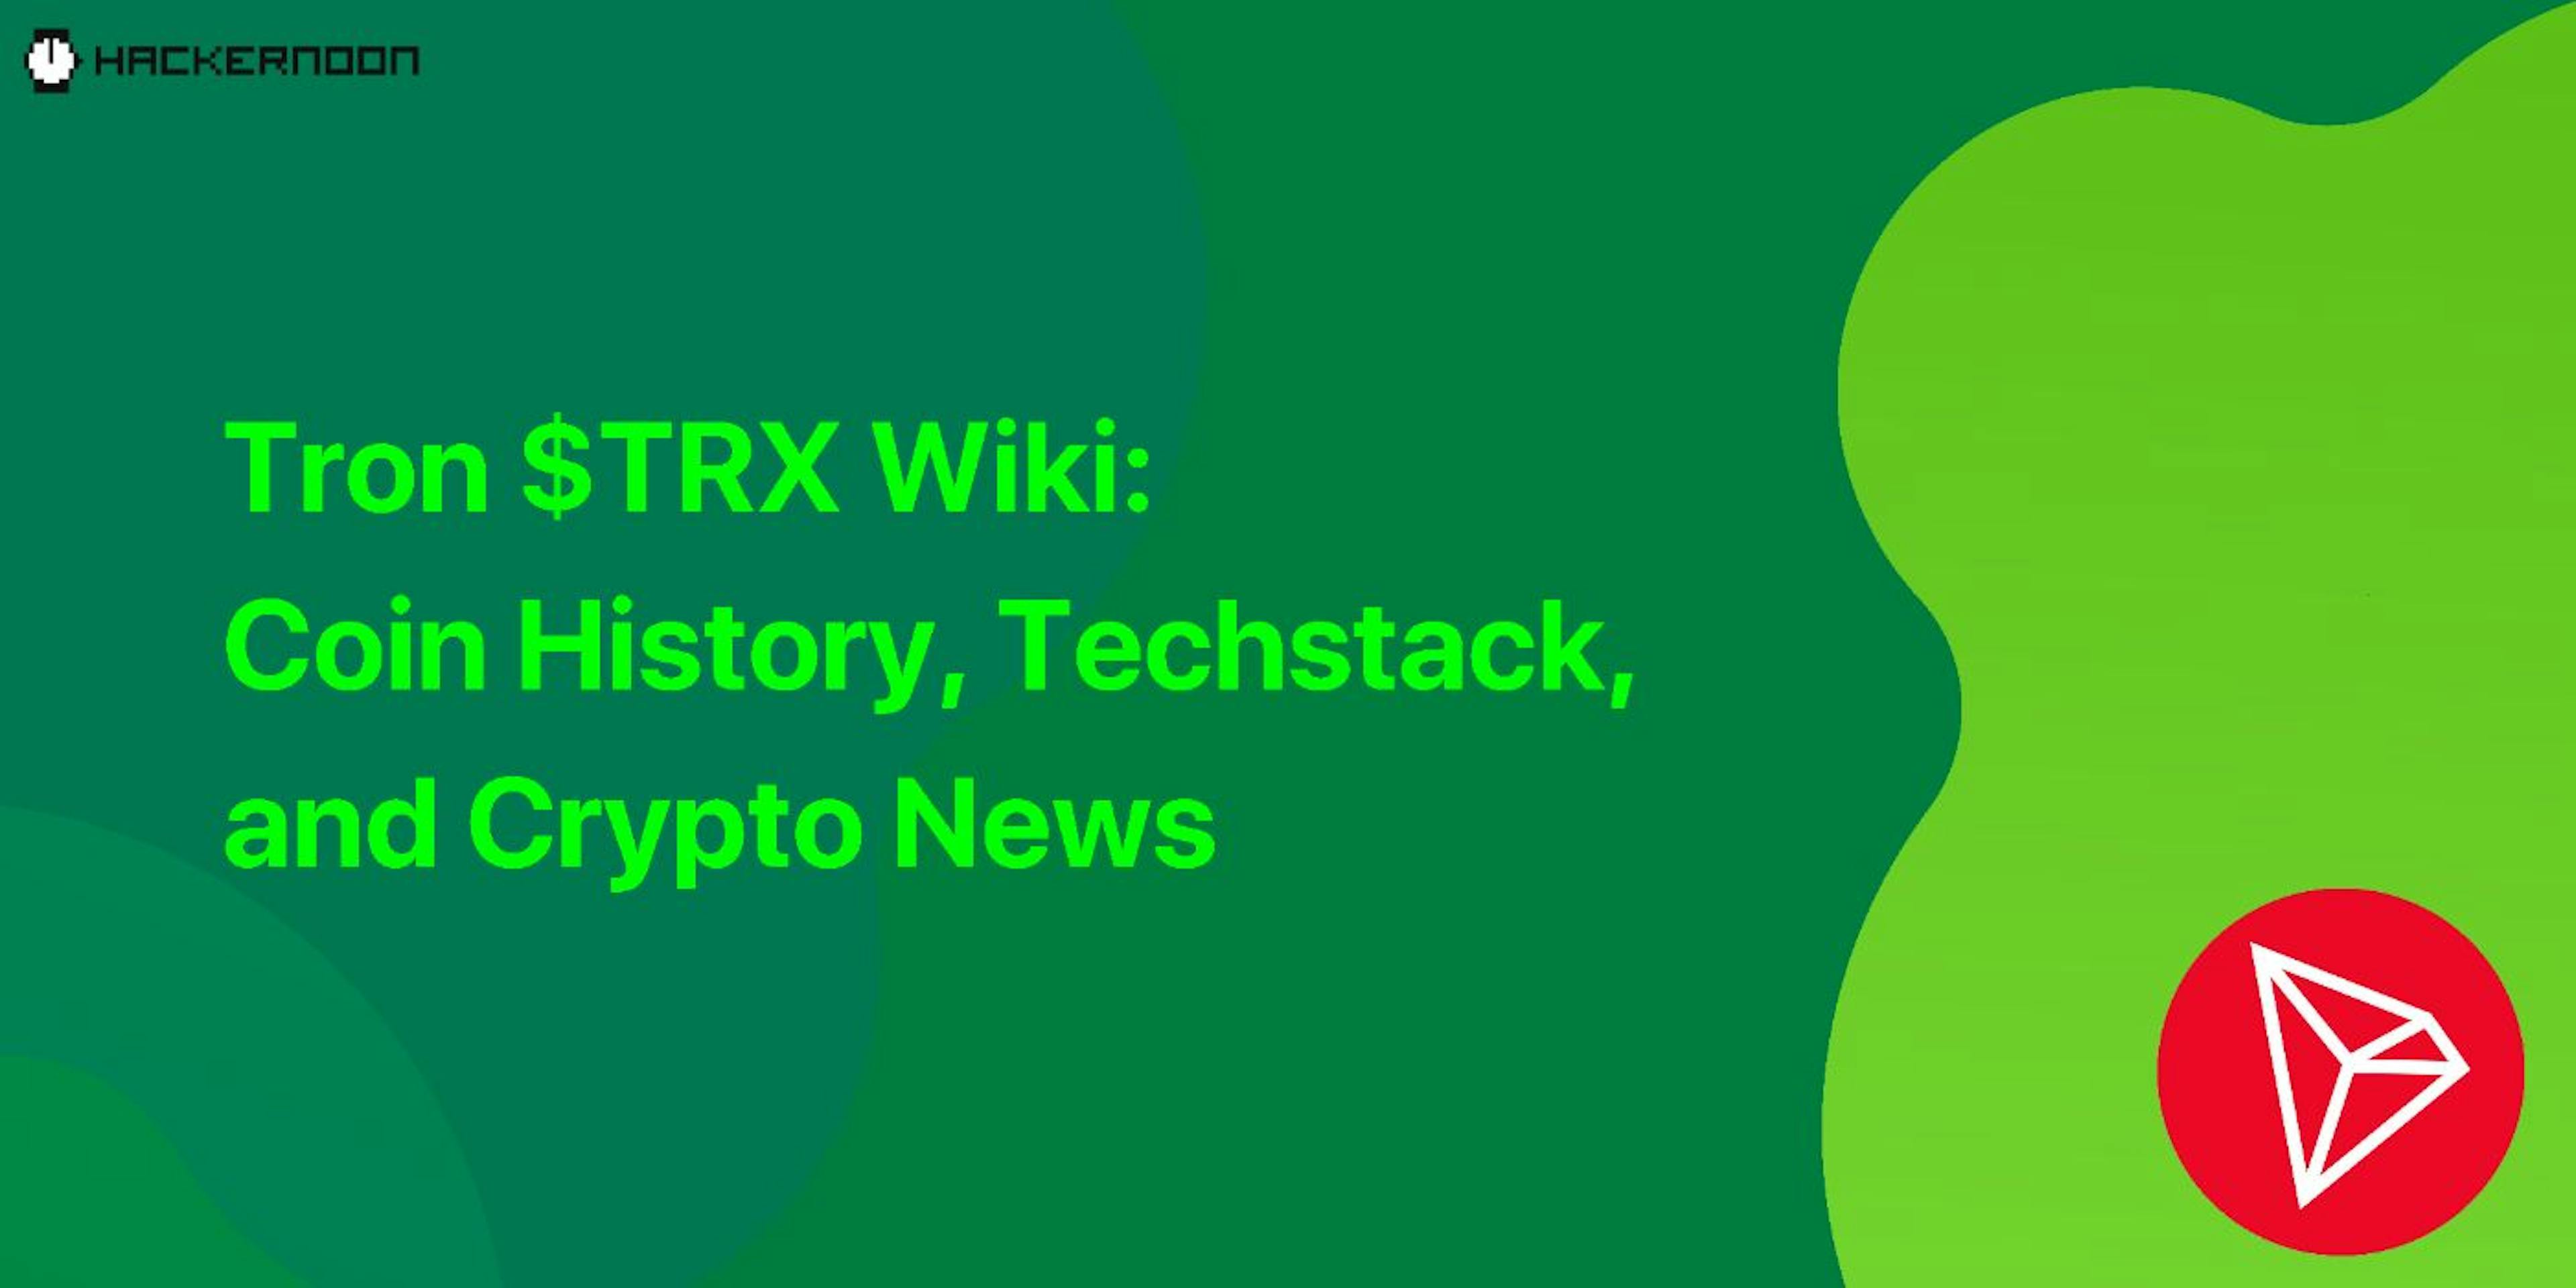 /tron-$trx-wiki-coin-history-techstack-and-crypto-news feature image